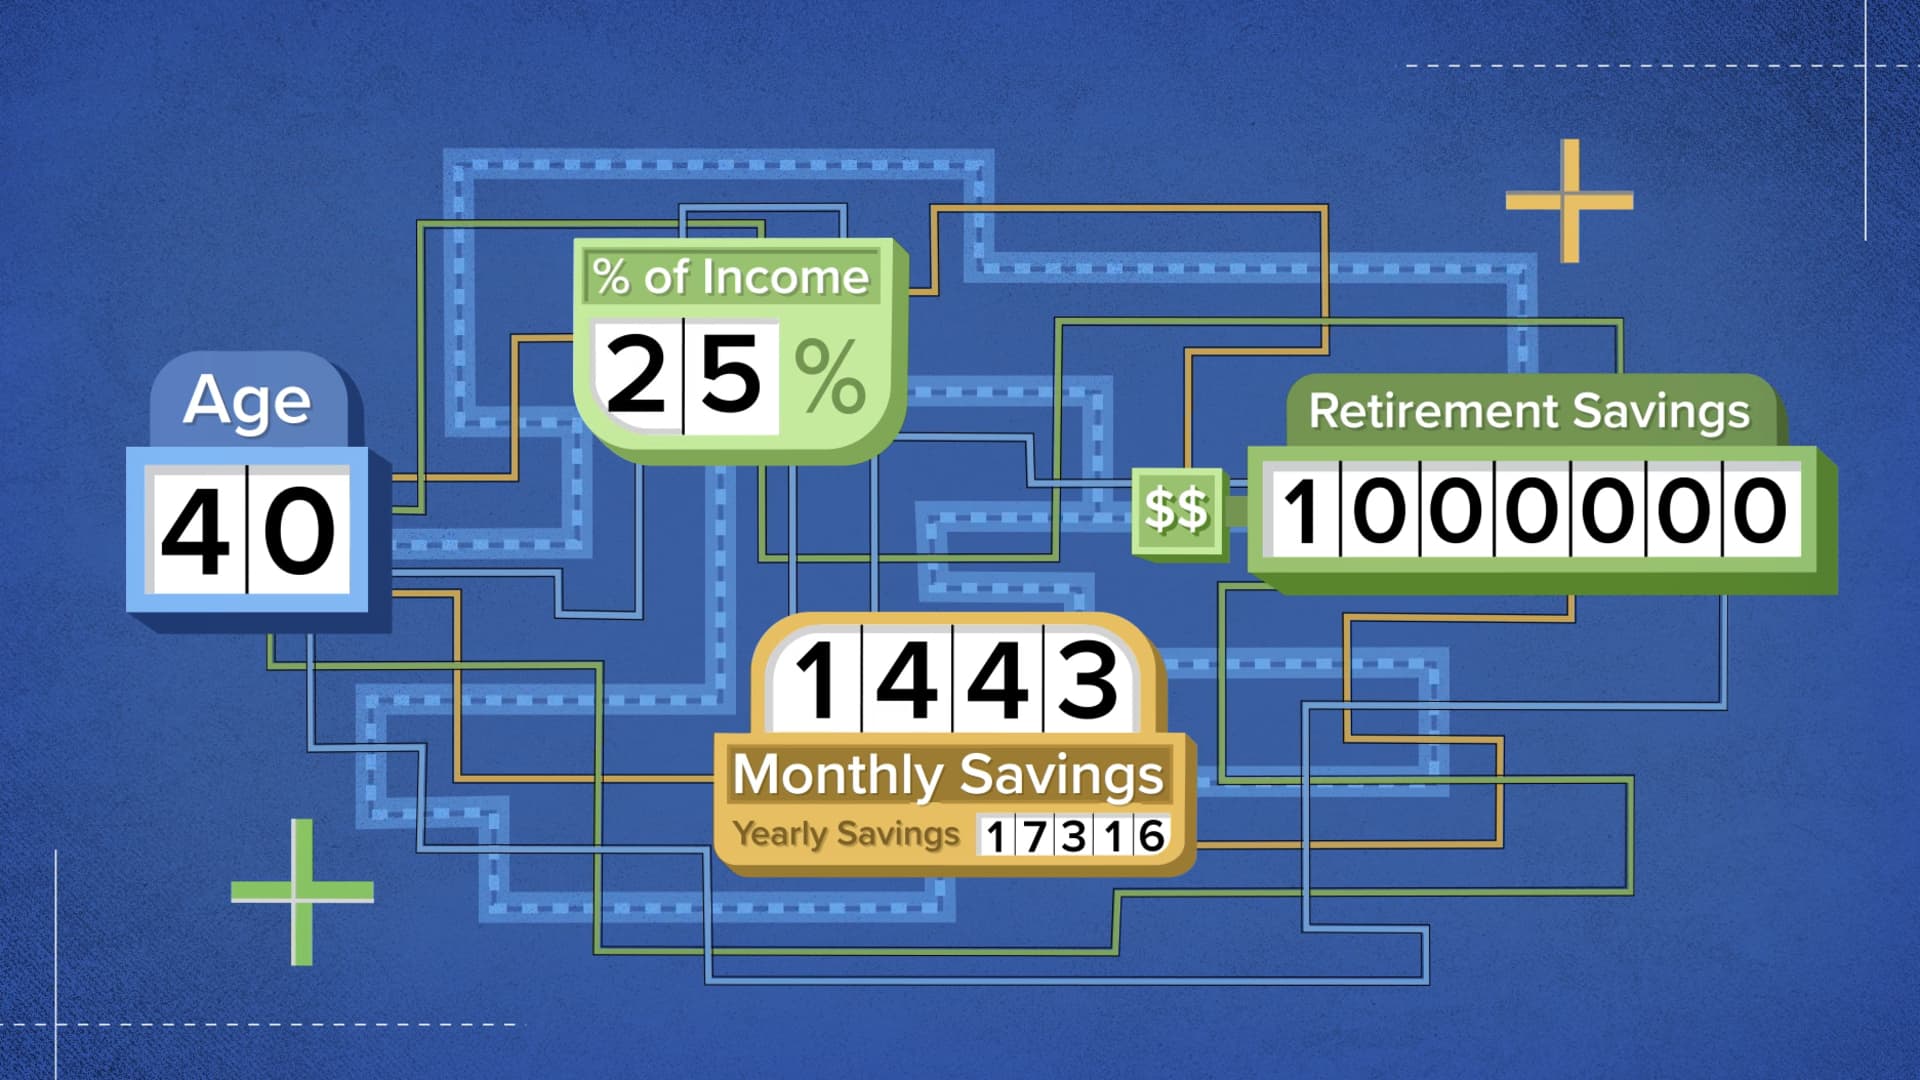 How to save $1 million for retirement on an annual salary of $70,000